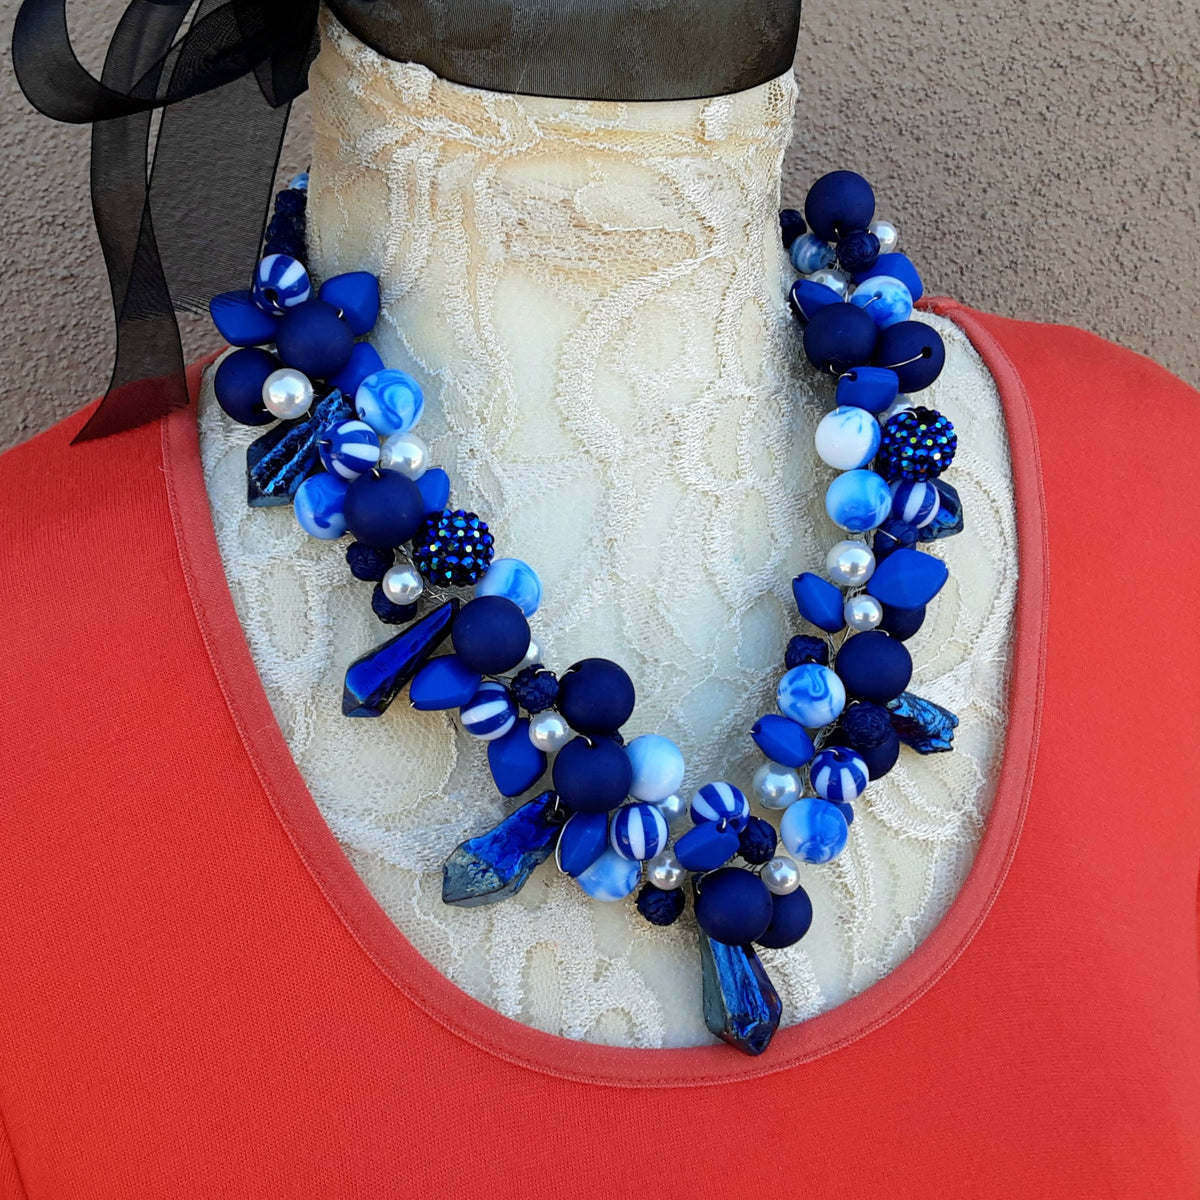 Chunky Cluster Statement Necklace - Colorful Blue & White Collar - Unique Twisted Wire Gift for Her